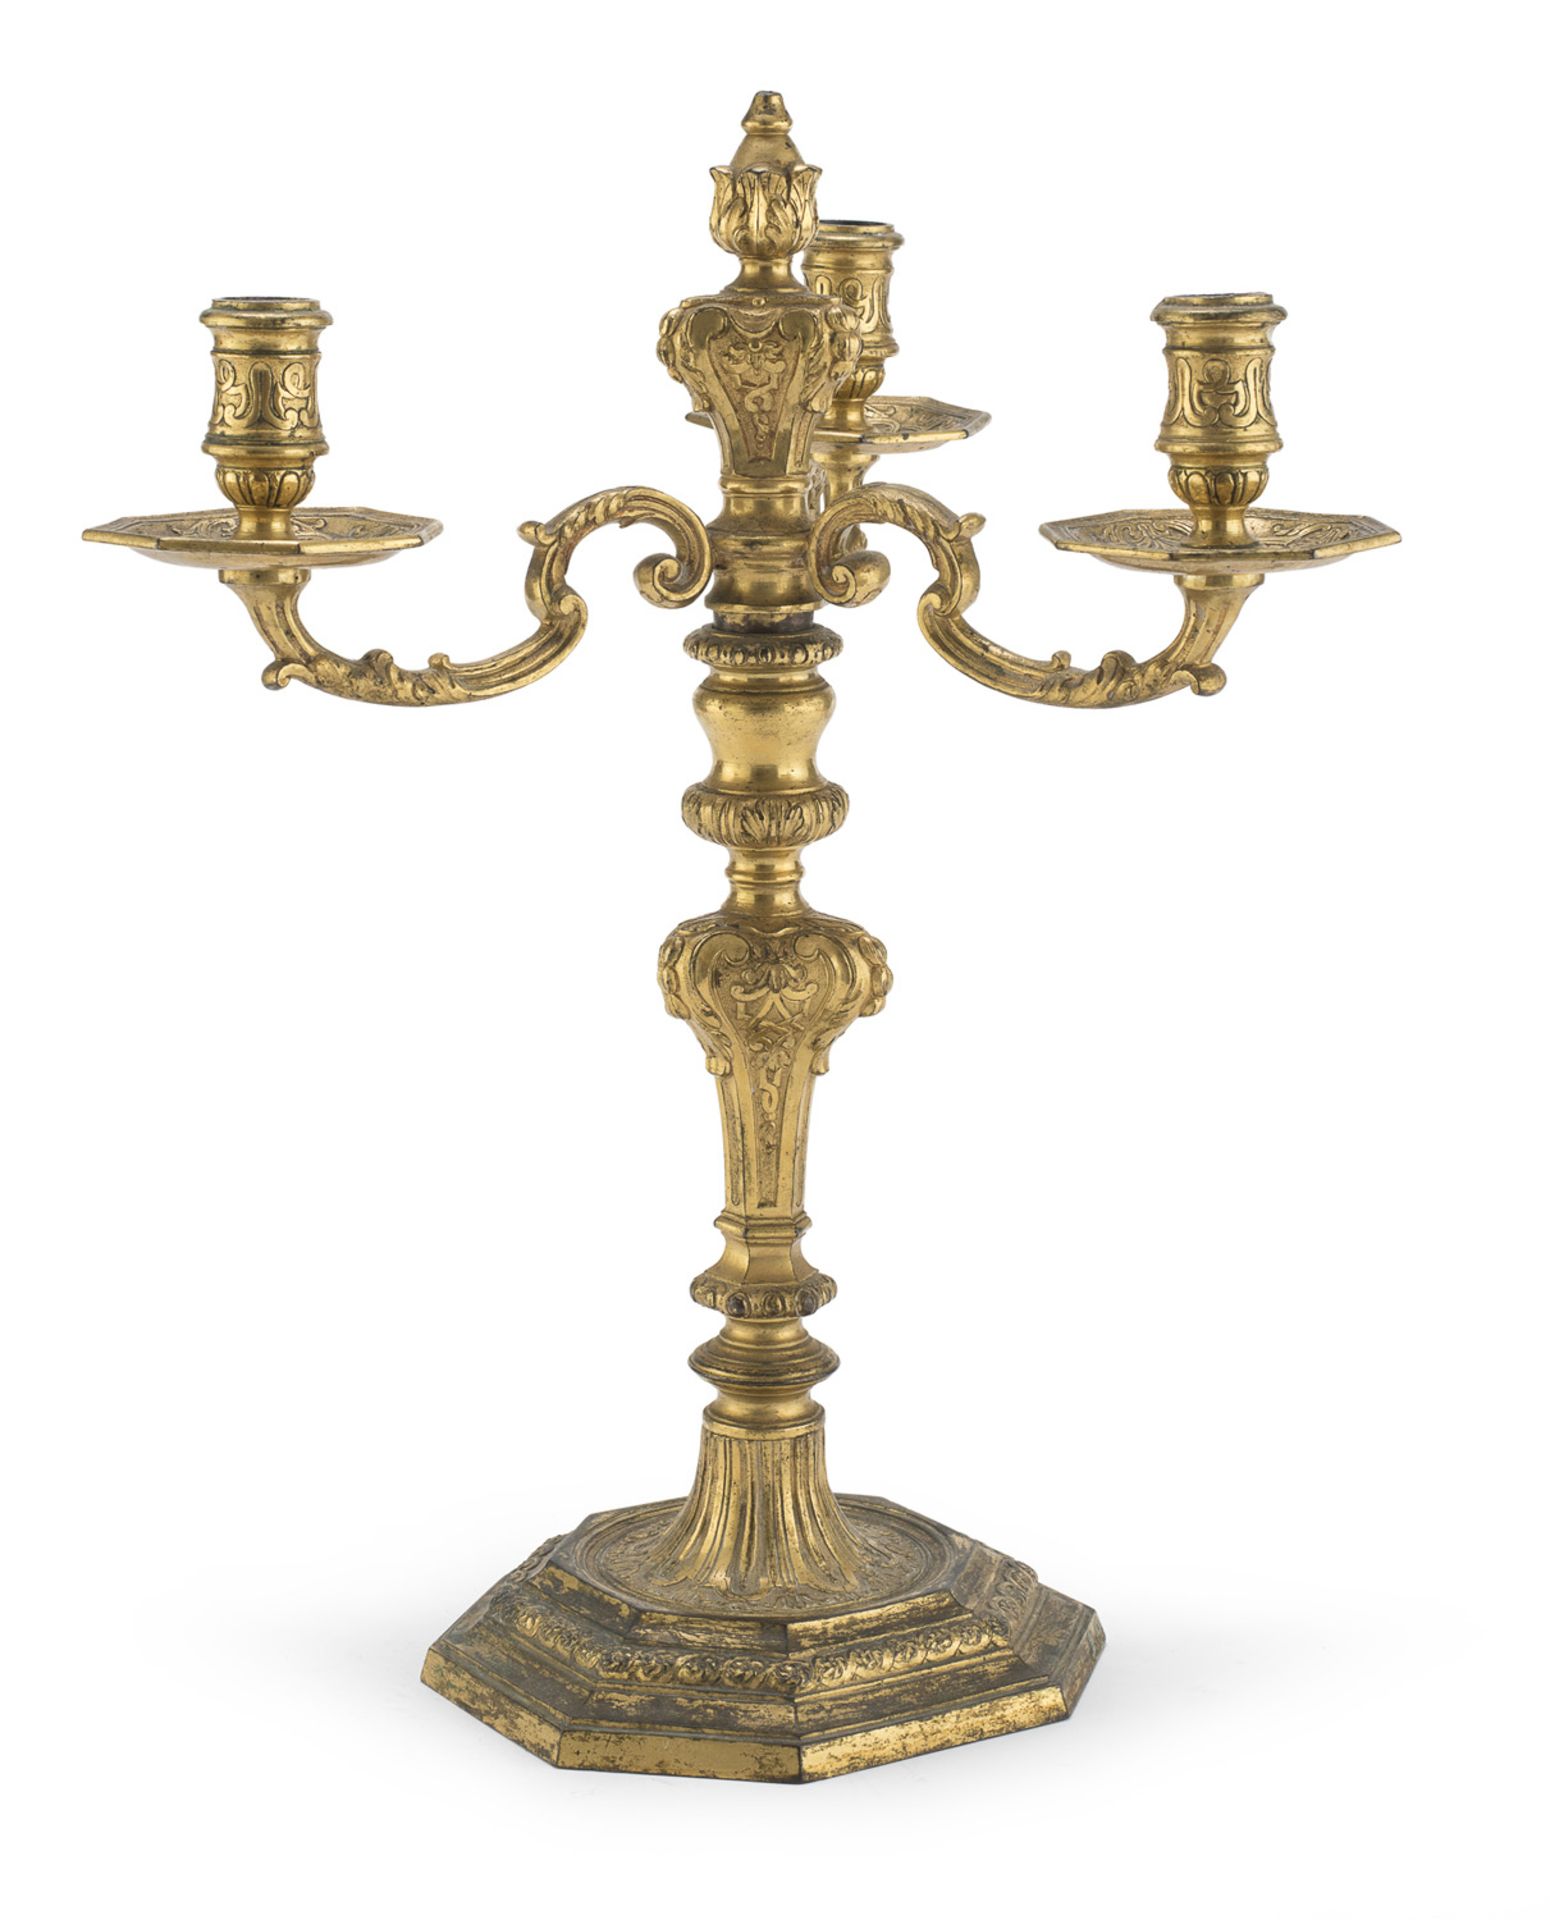 RARE CANDLESTICK IN BRONZE FRANCE OR PIEDMONT 18TH CENTURY